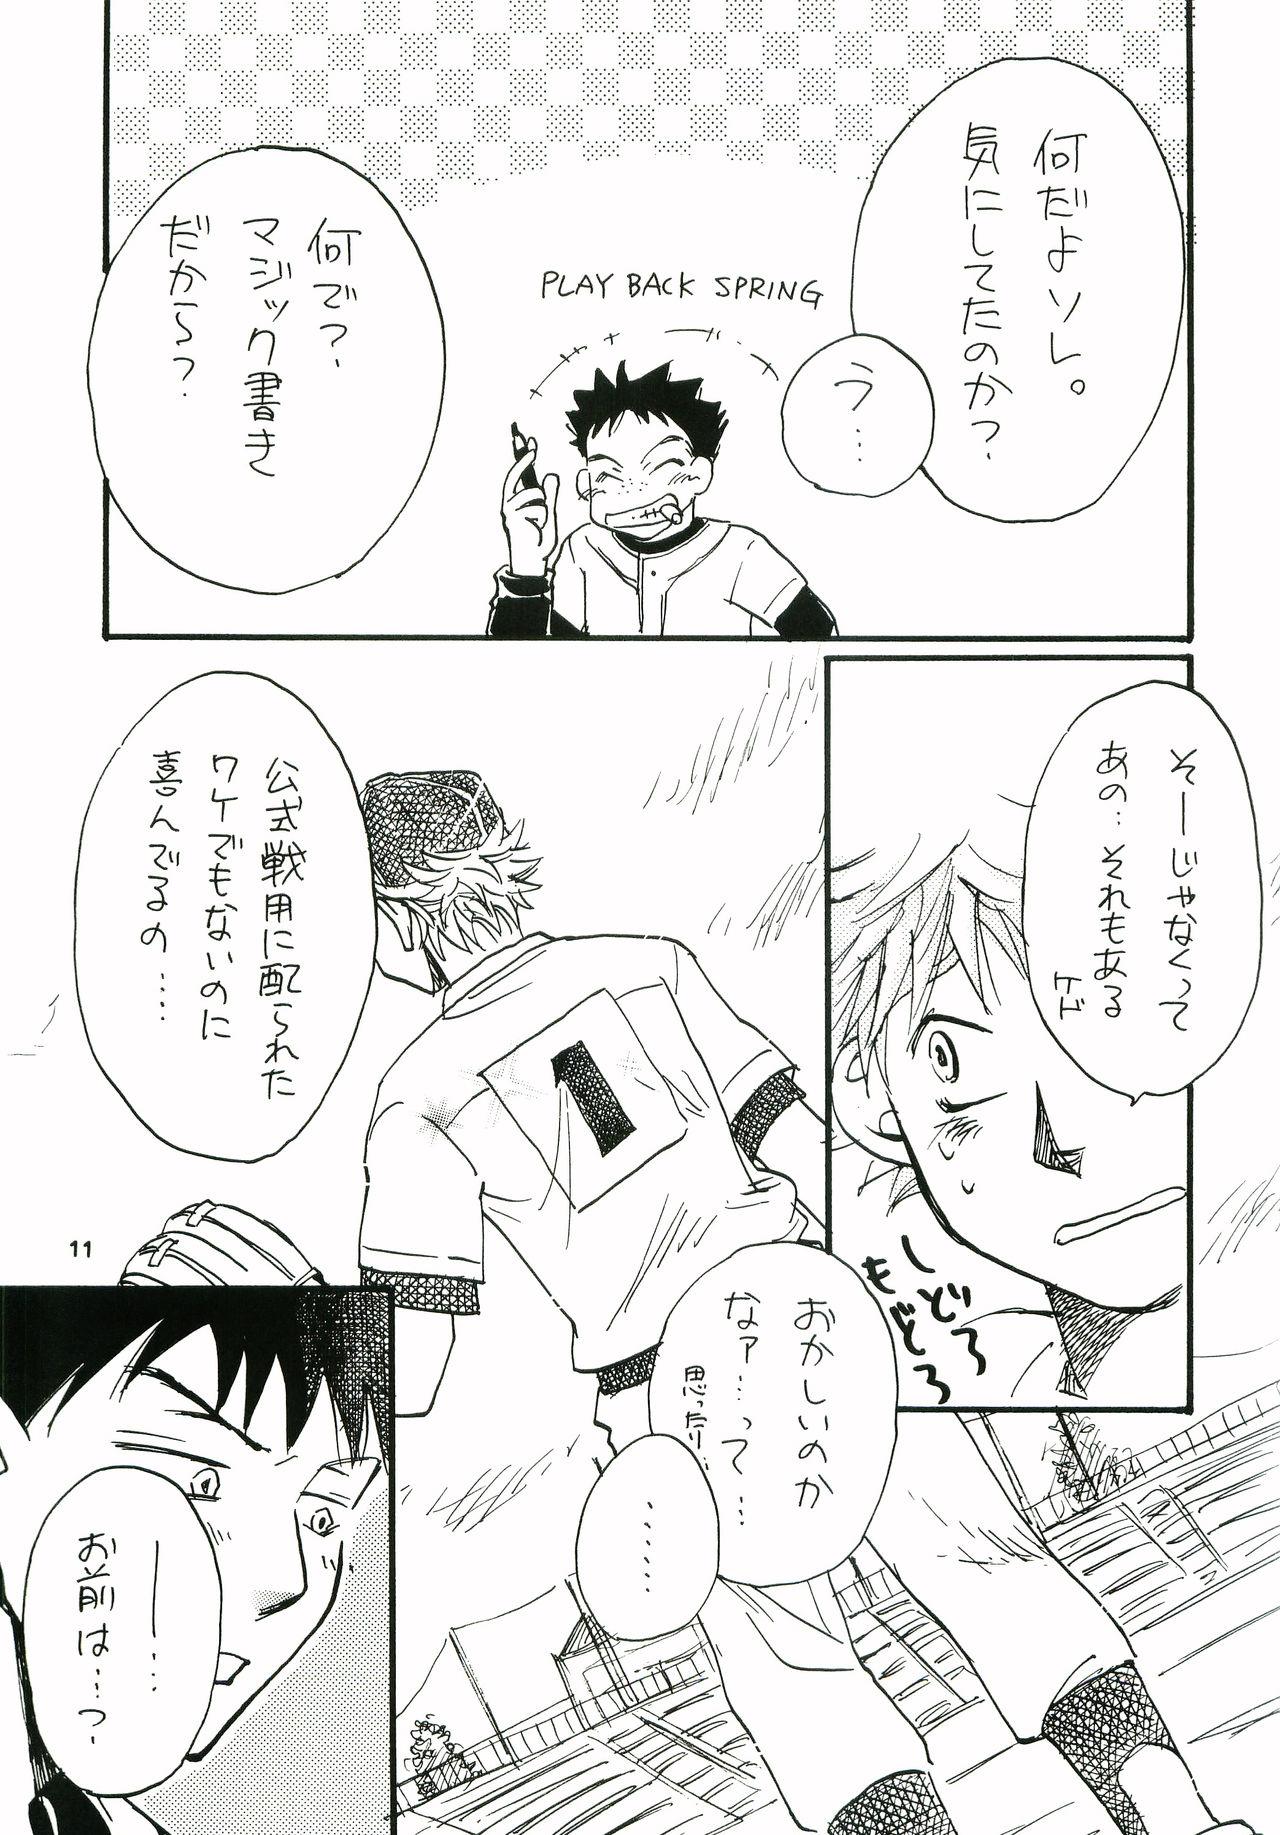 Blowing Honto no Ace Number o Kimi ni. - Ookiku furikabutte Muscle - Page 10